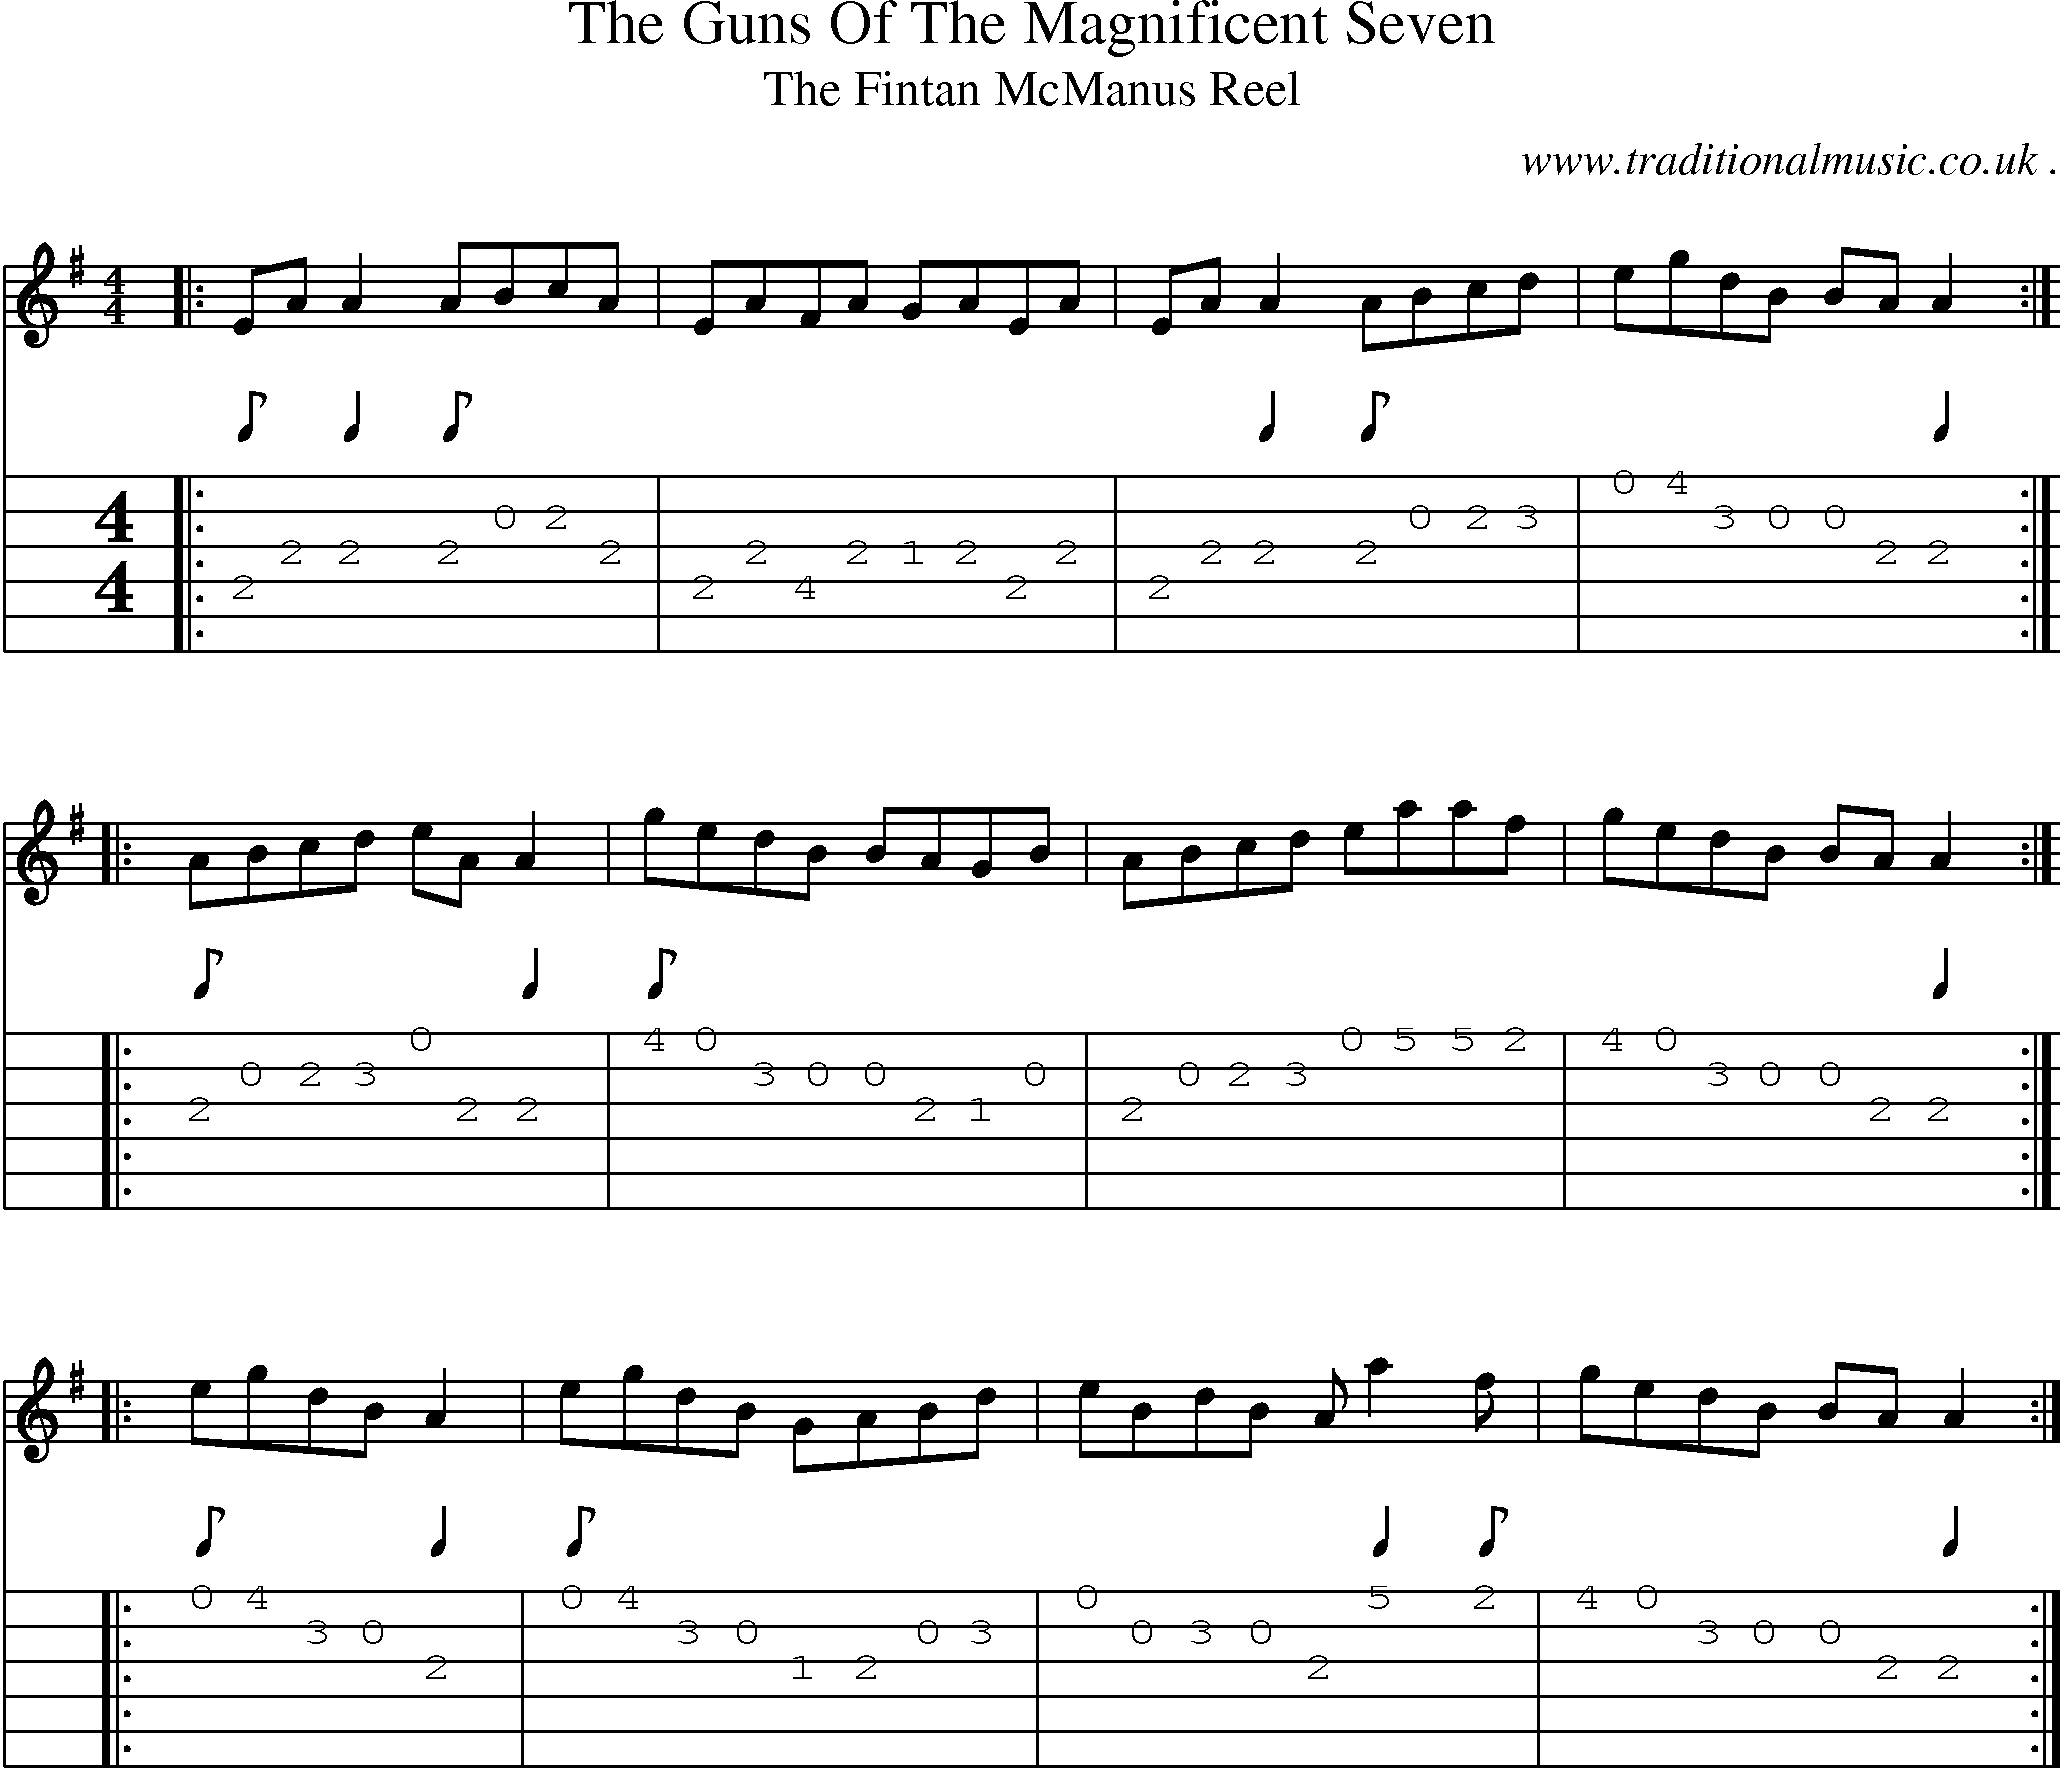 Sheet-Music and Guitar Tabs for The Guns Of The Magnificent Seven